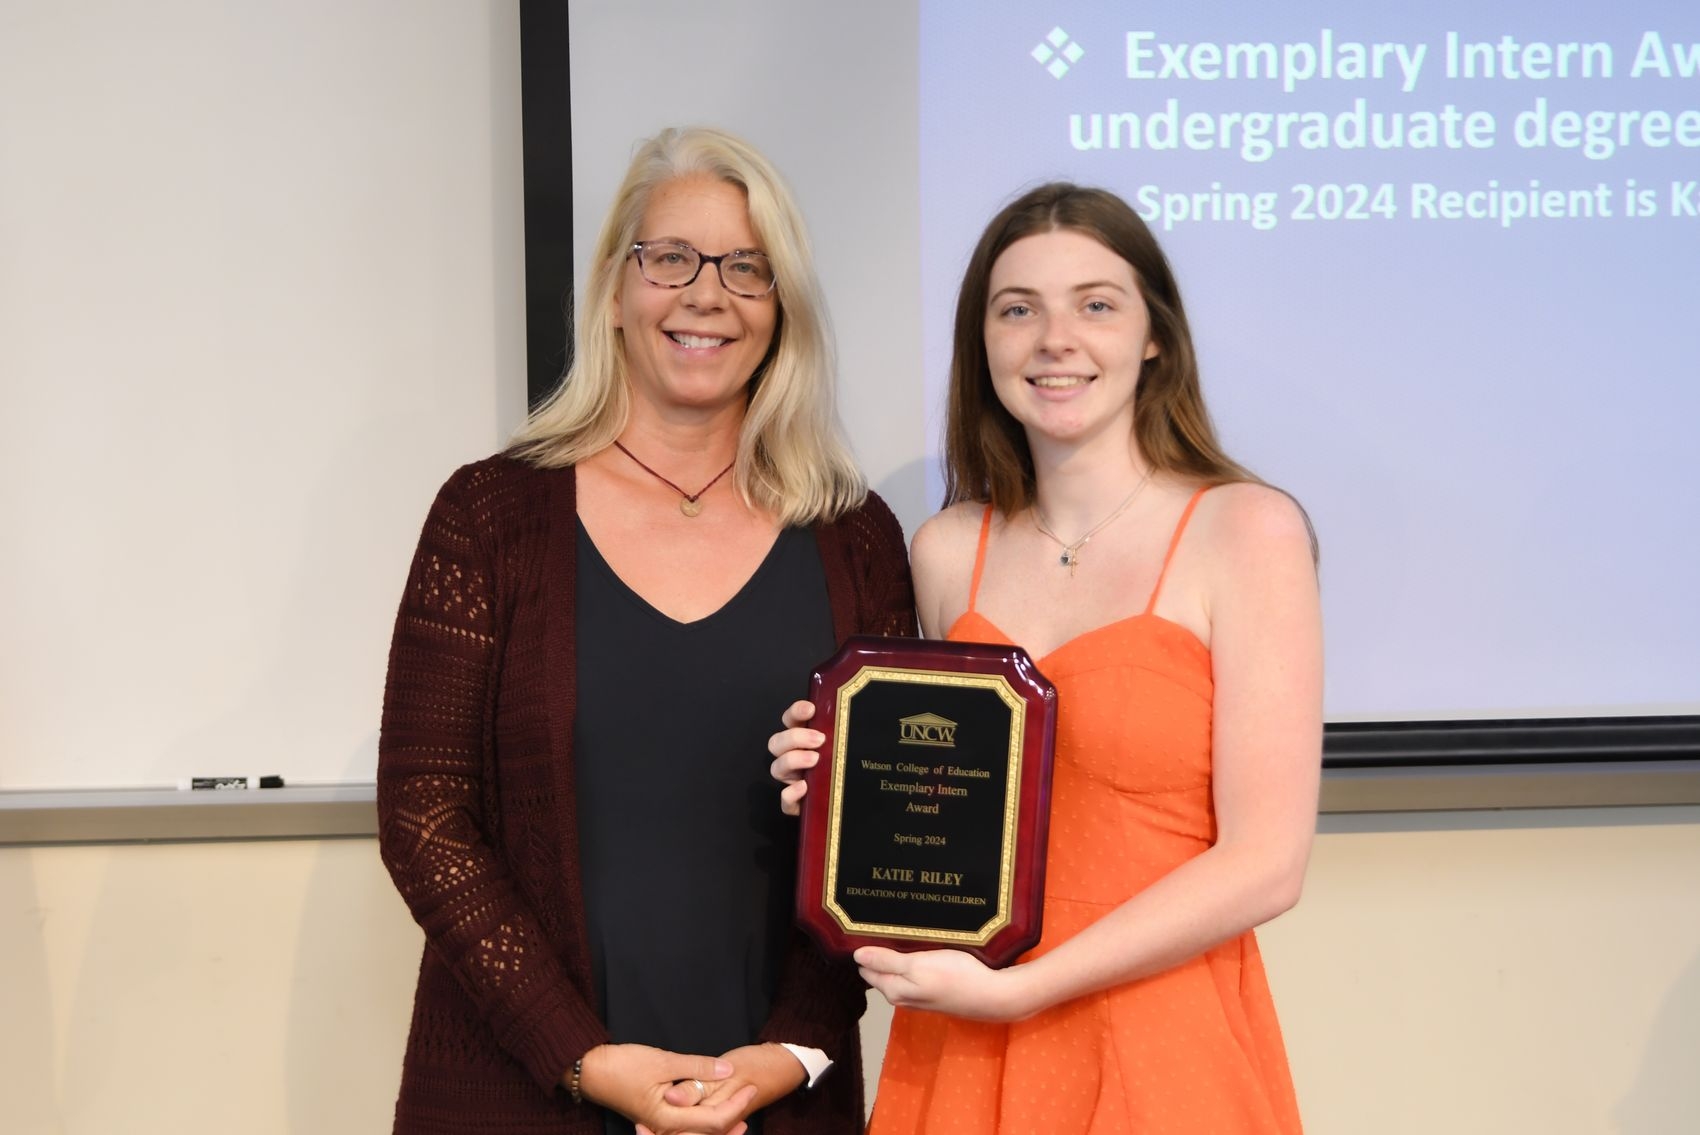 Katie Riley ’24 is the recipient of the Exemplary Intern Award for an intern in an undergraduate degree program. Katie earned her degree in the Education of Young Children. 